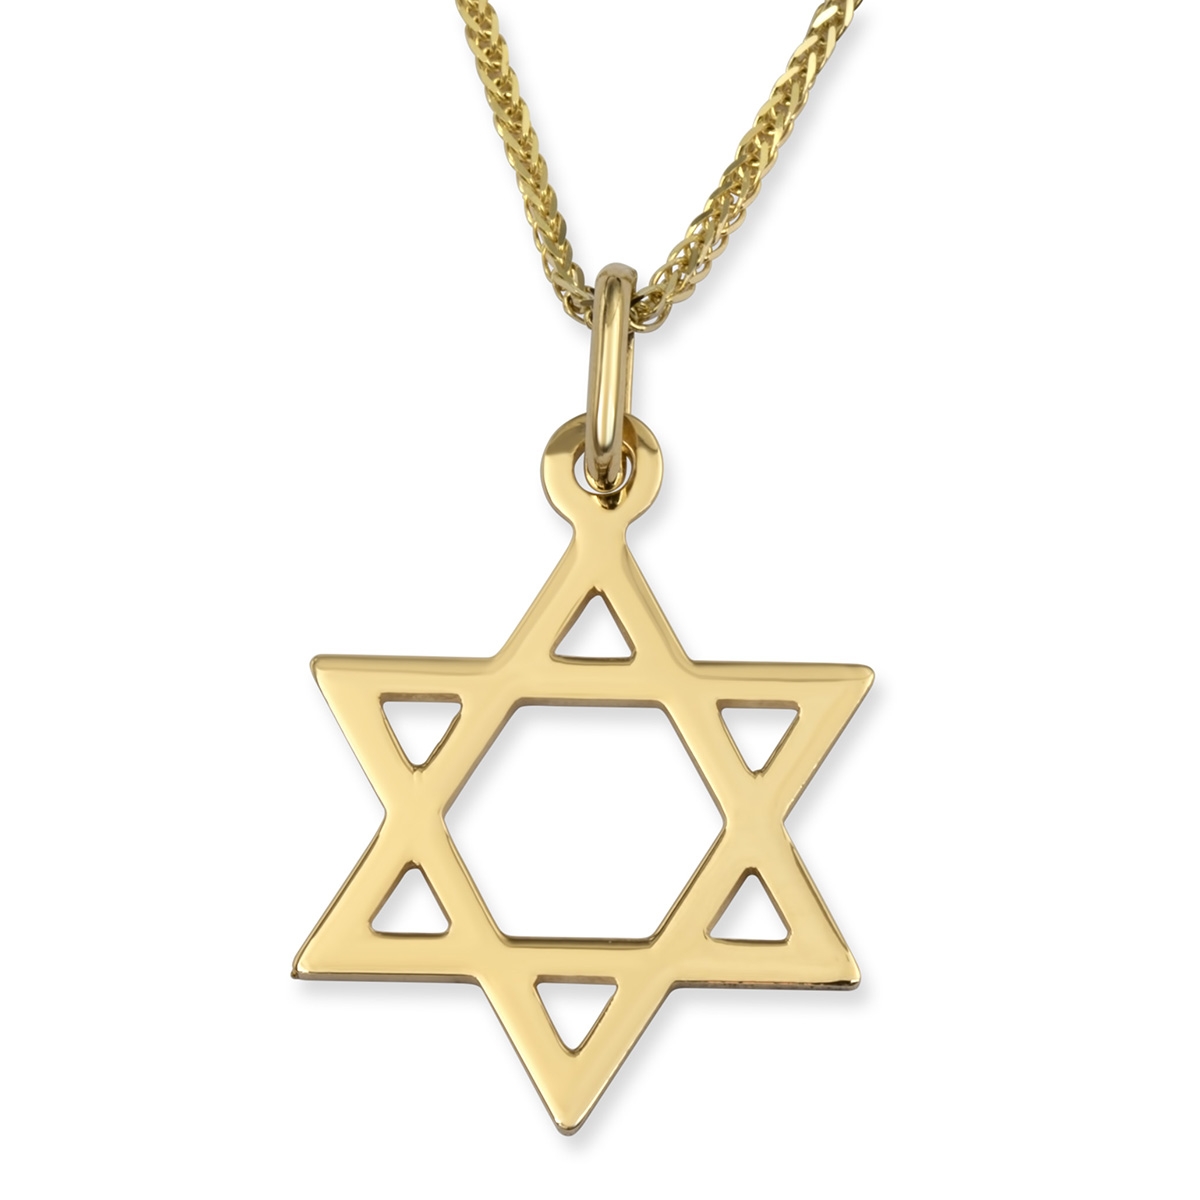 Large 14K Yellow Gold Star of David Pendant Necklace - 1